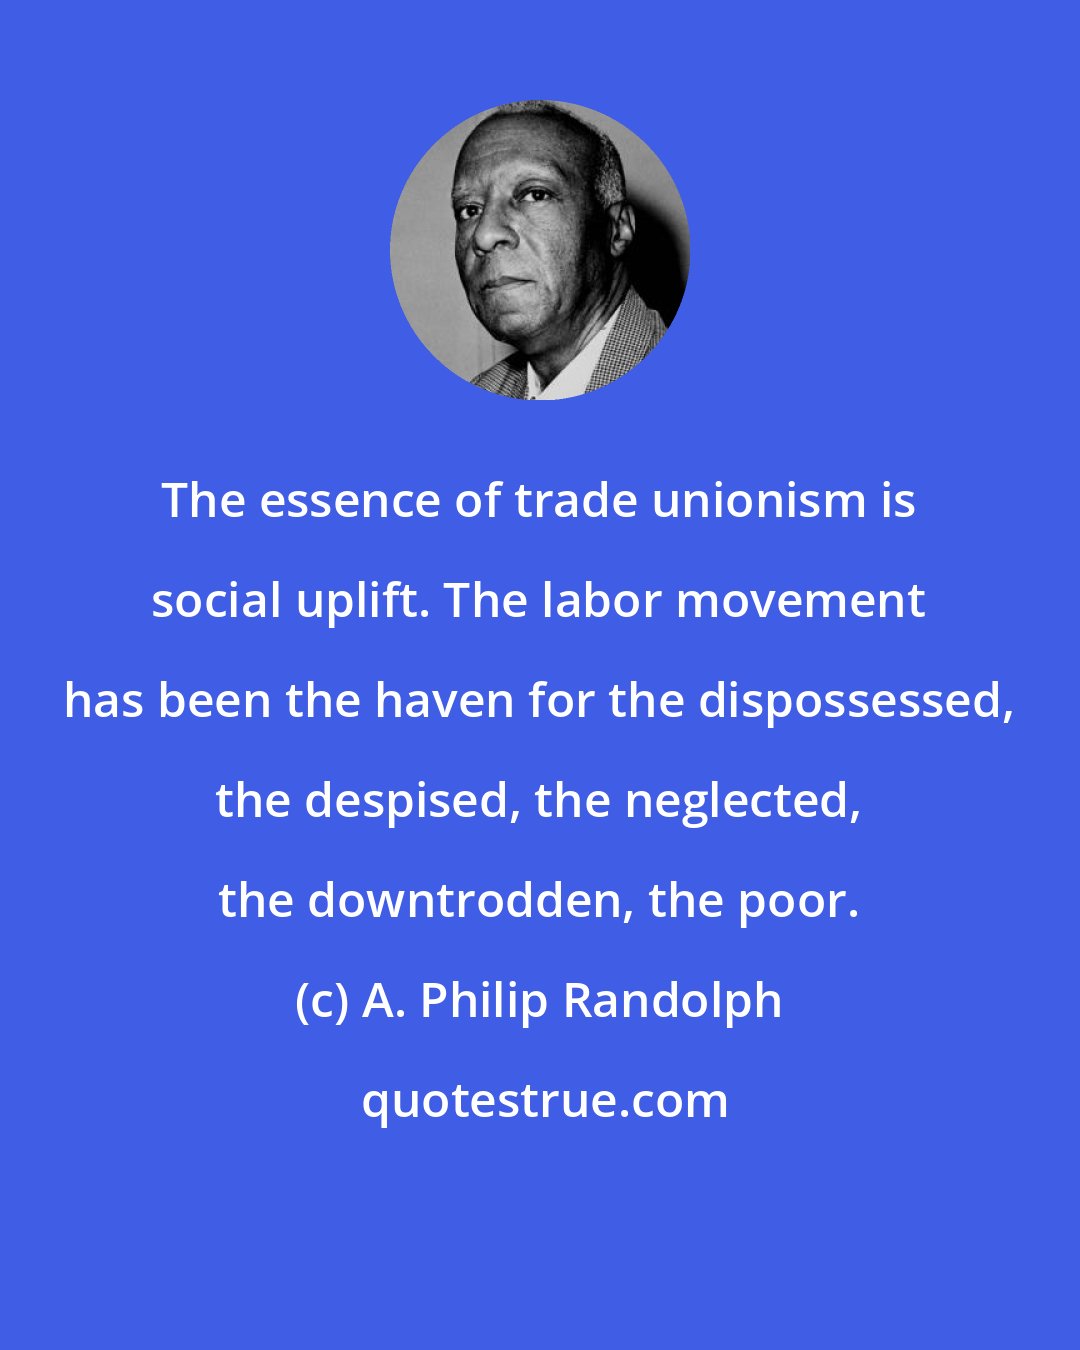 A. Philip Randolph: The essence of trade unionism is social uplift. The labor movement has been the haven for the dispossessed, the despised, the neglected, the downtrodden, the poor.